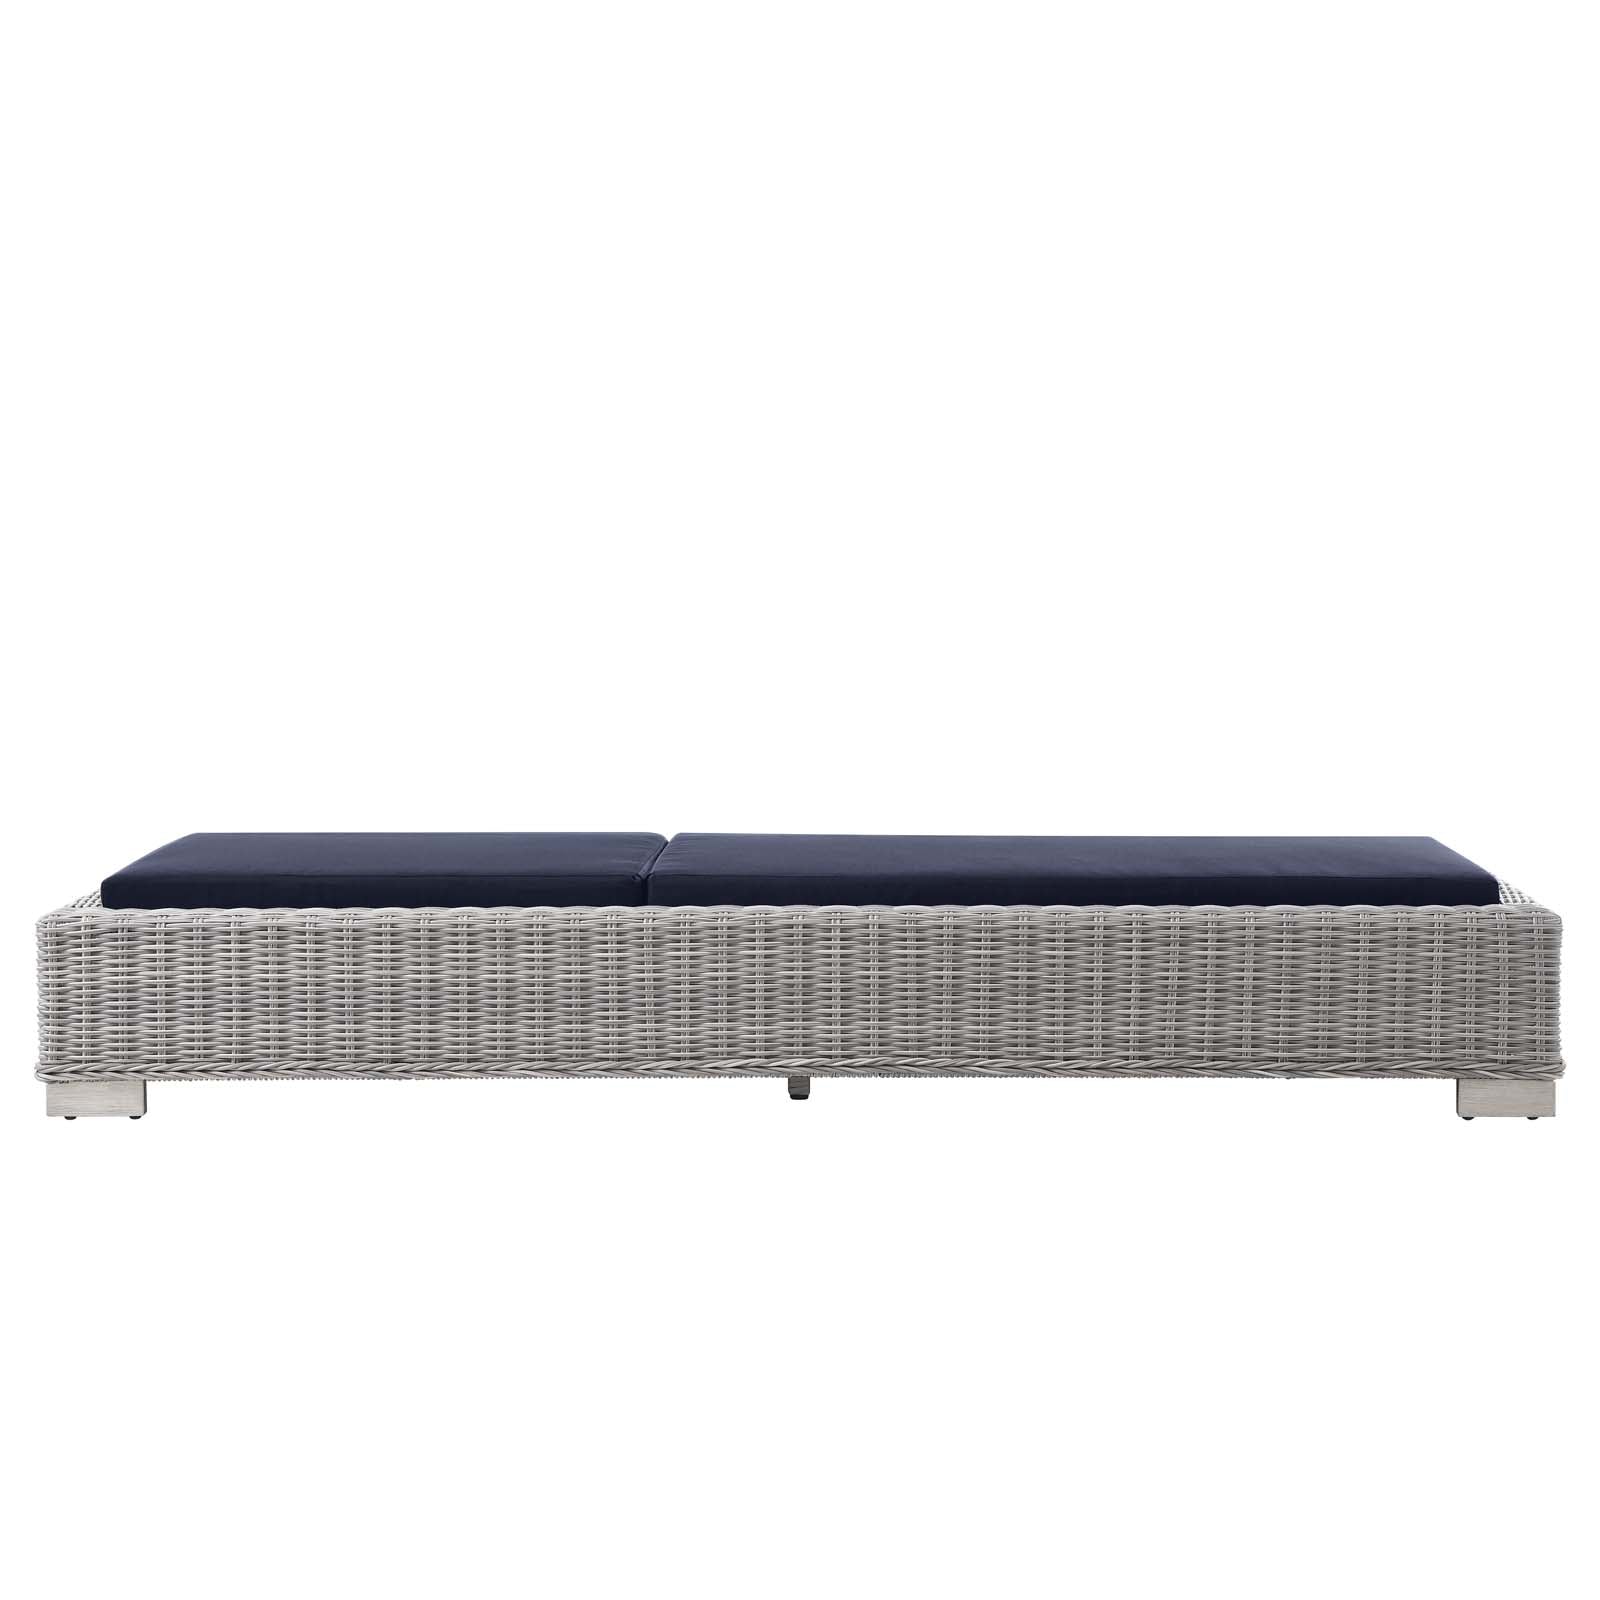 Modway - Conway Outdoor Patio Wicker Rattan Chaise Lounge - EEI-4843